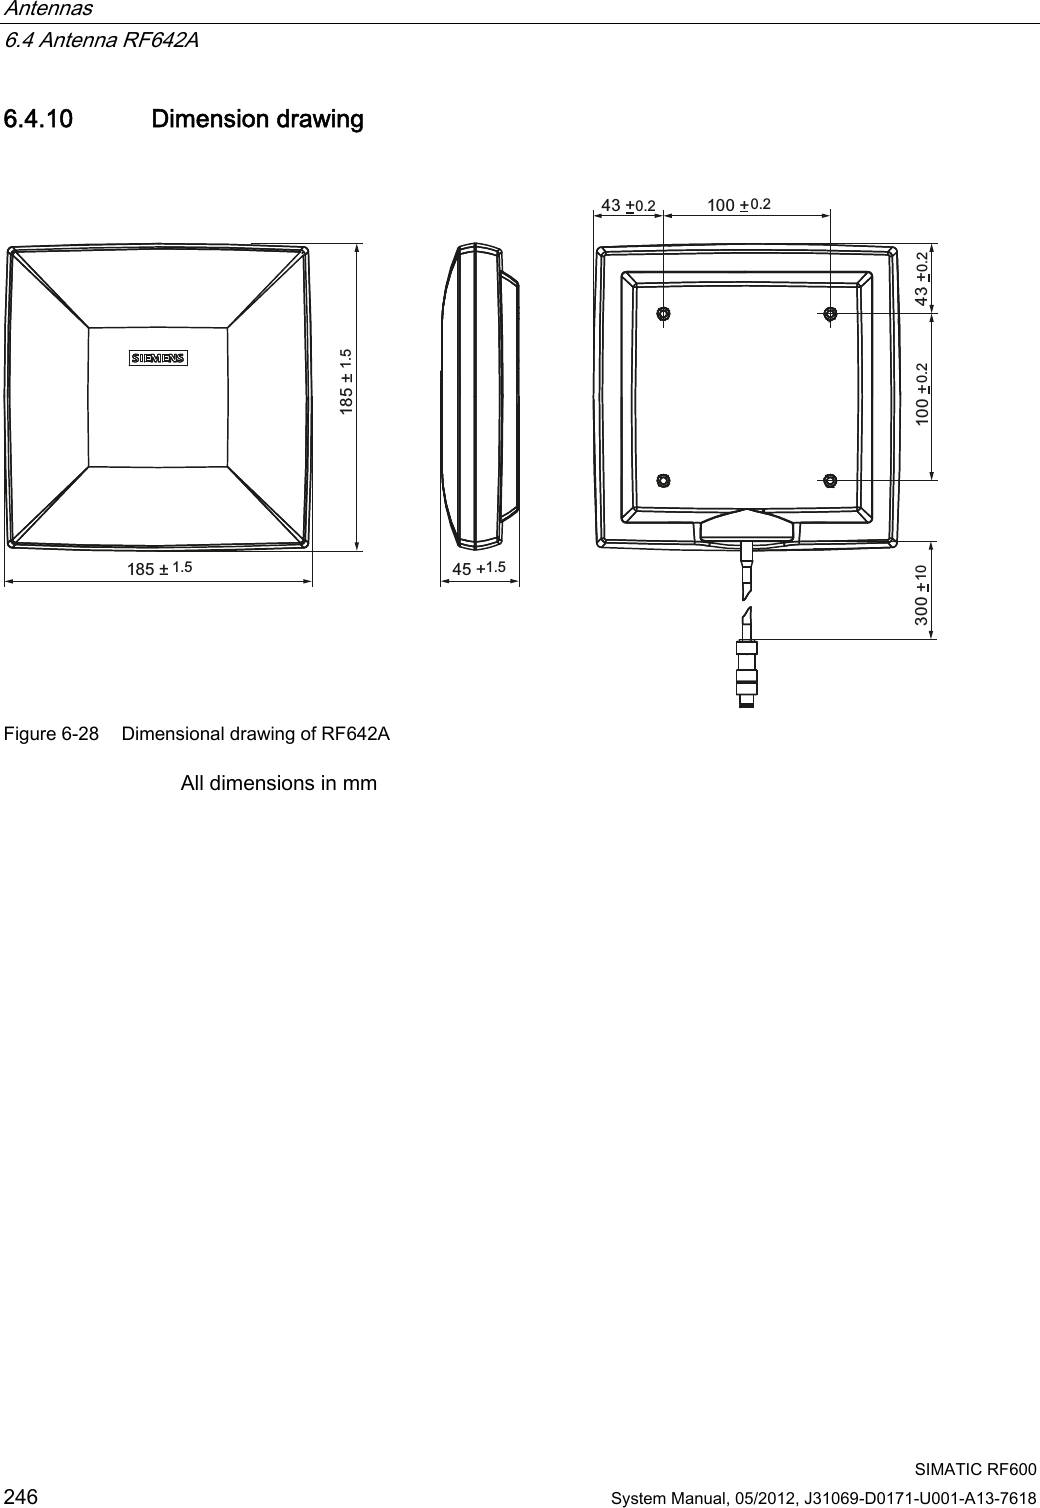 Antennas   6.4 Antenna RF642A  SIMATIC RF600 246 System Manual, 05/2012, J31069-D0171-U001-A13-7618 6.4.10 Dimension drawing s s   Figure 6-28  Dimensional drawing of RF642A All dimensions in mm 